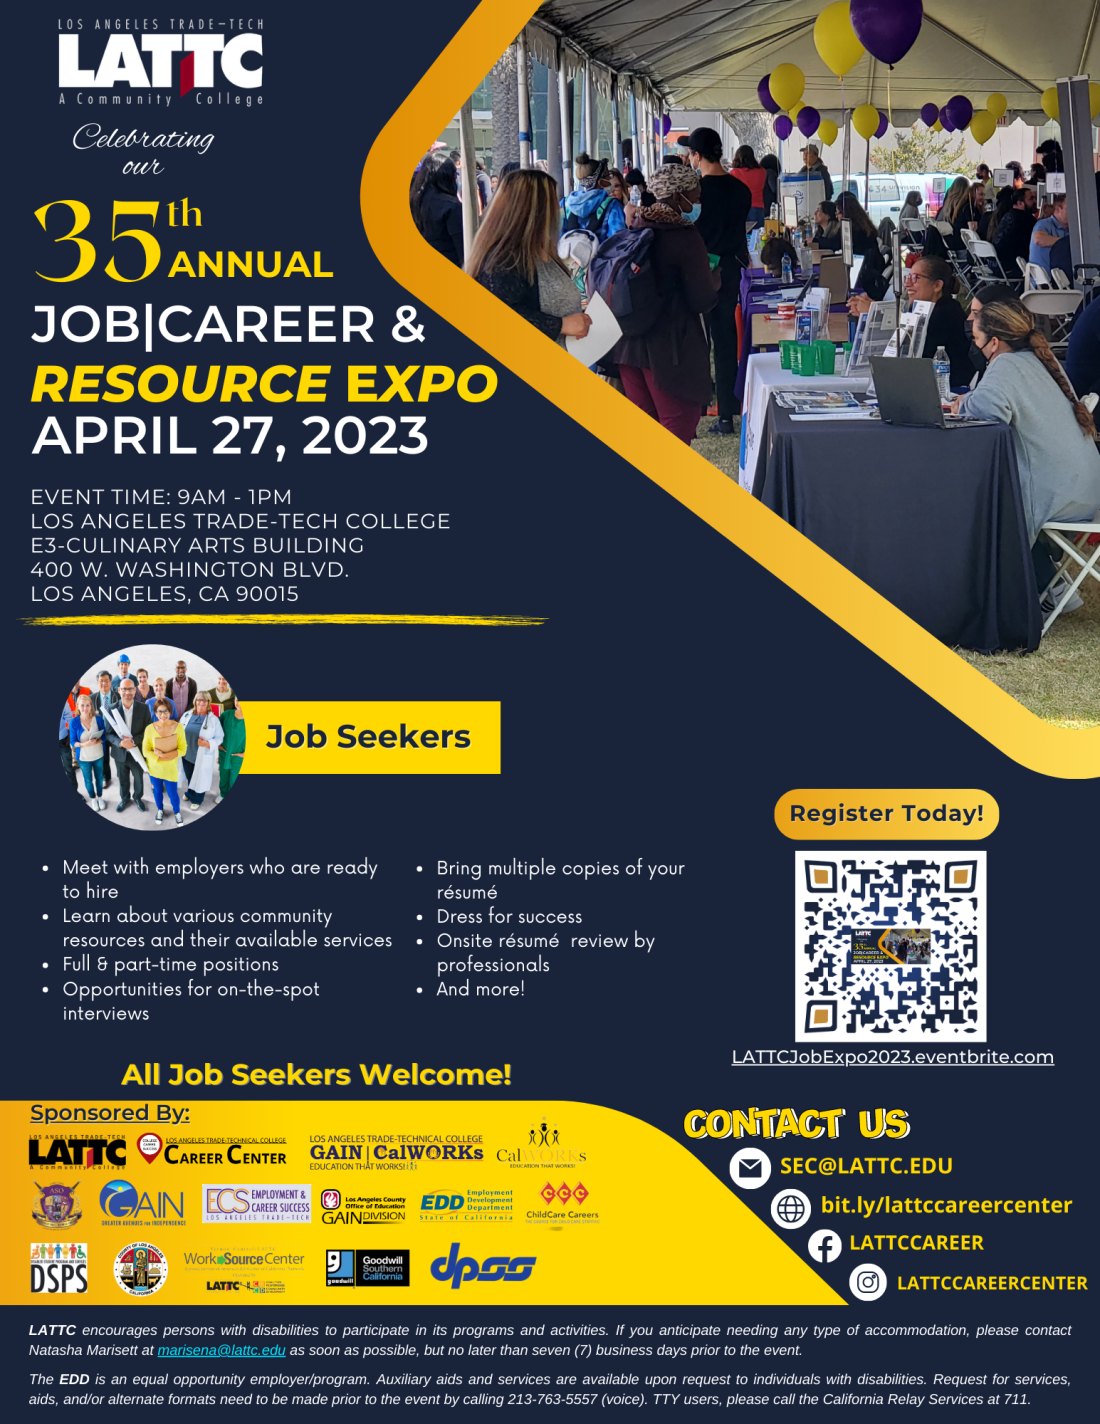 2023 Job-Career and Resource Expo flyer